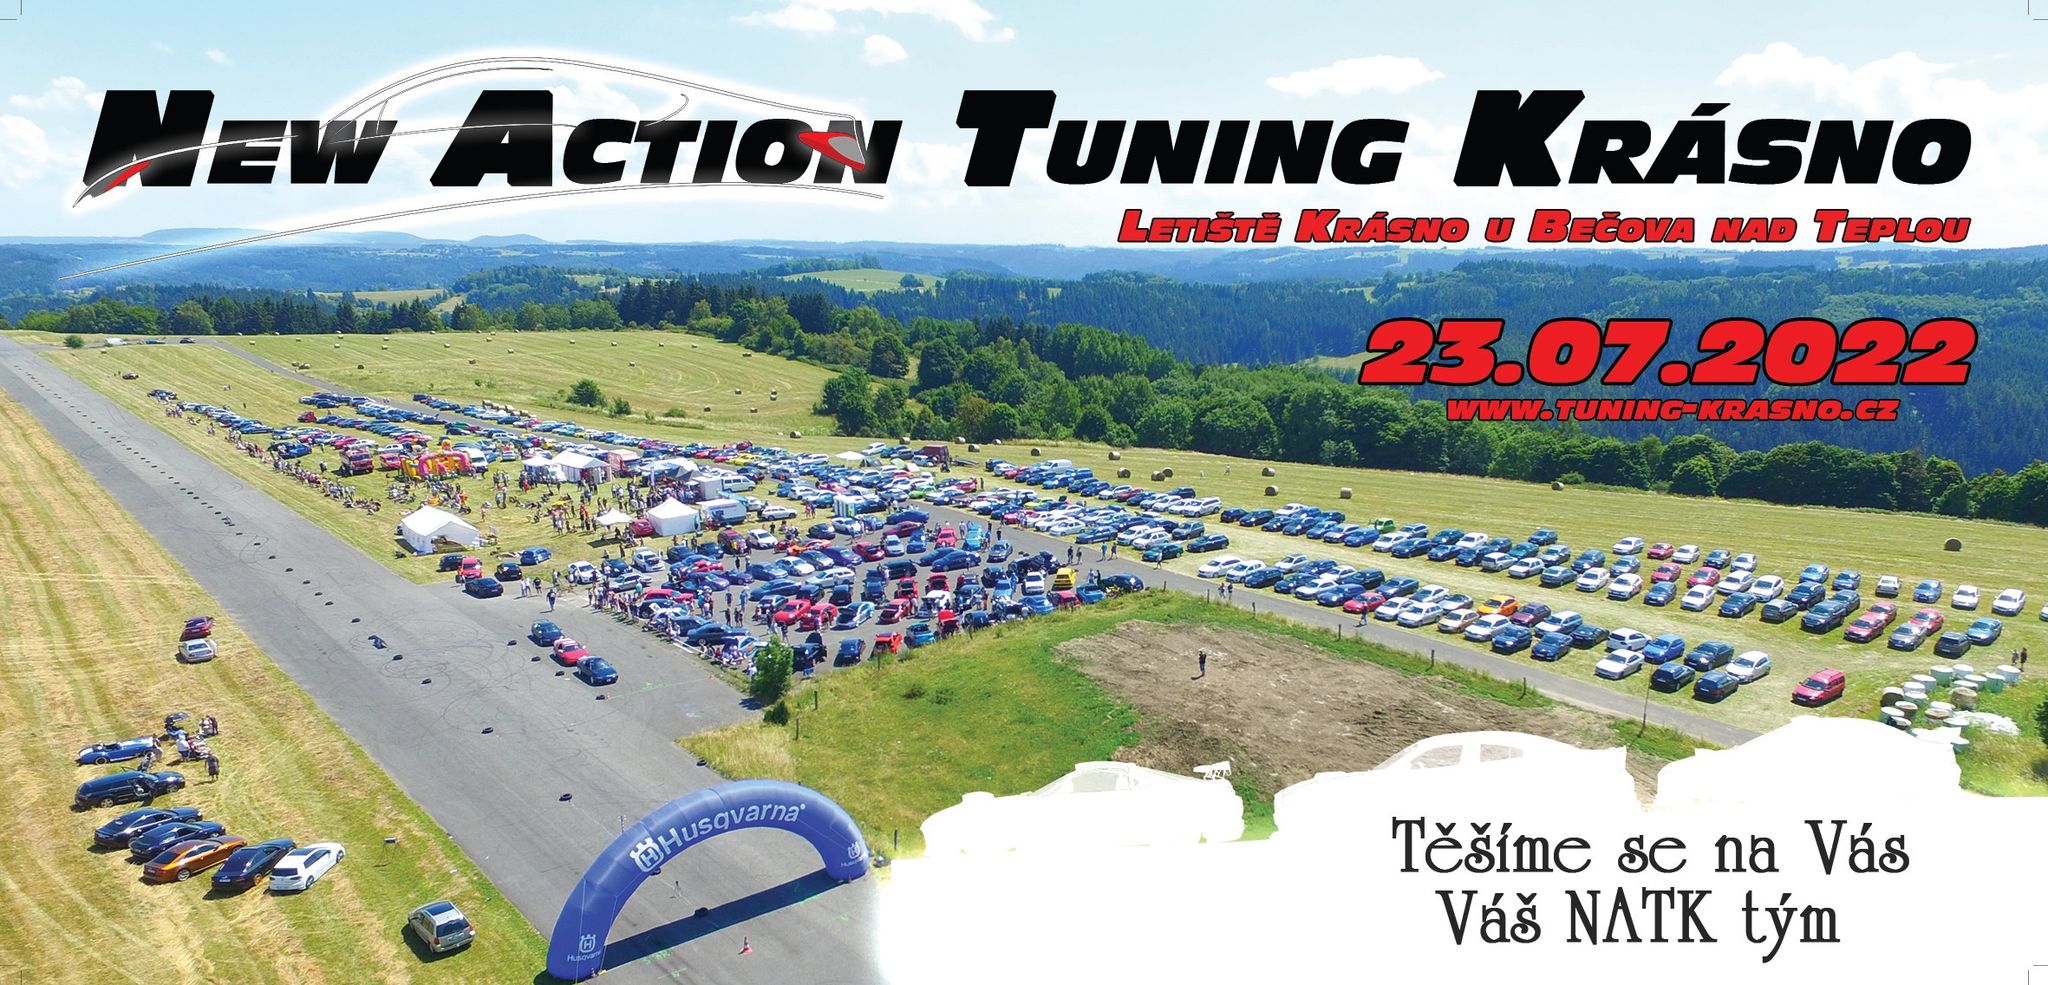 11. New Action Tuning Krásno